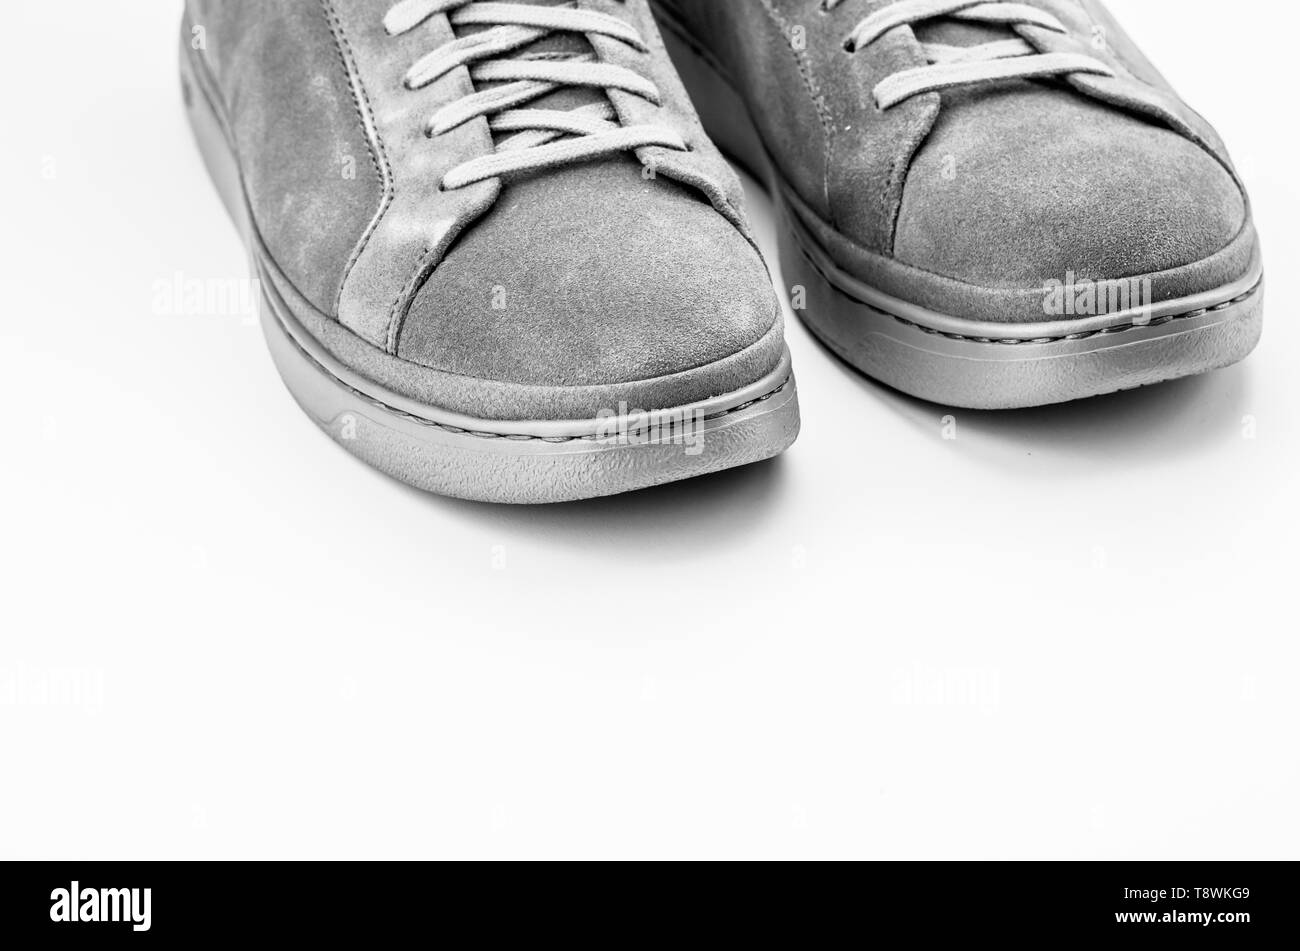 sneaker shoes on a blank surface with copy space Stock Photo